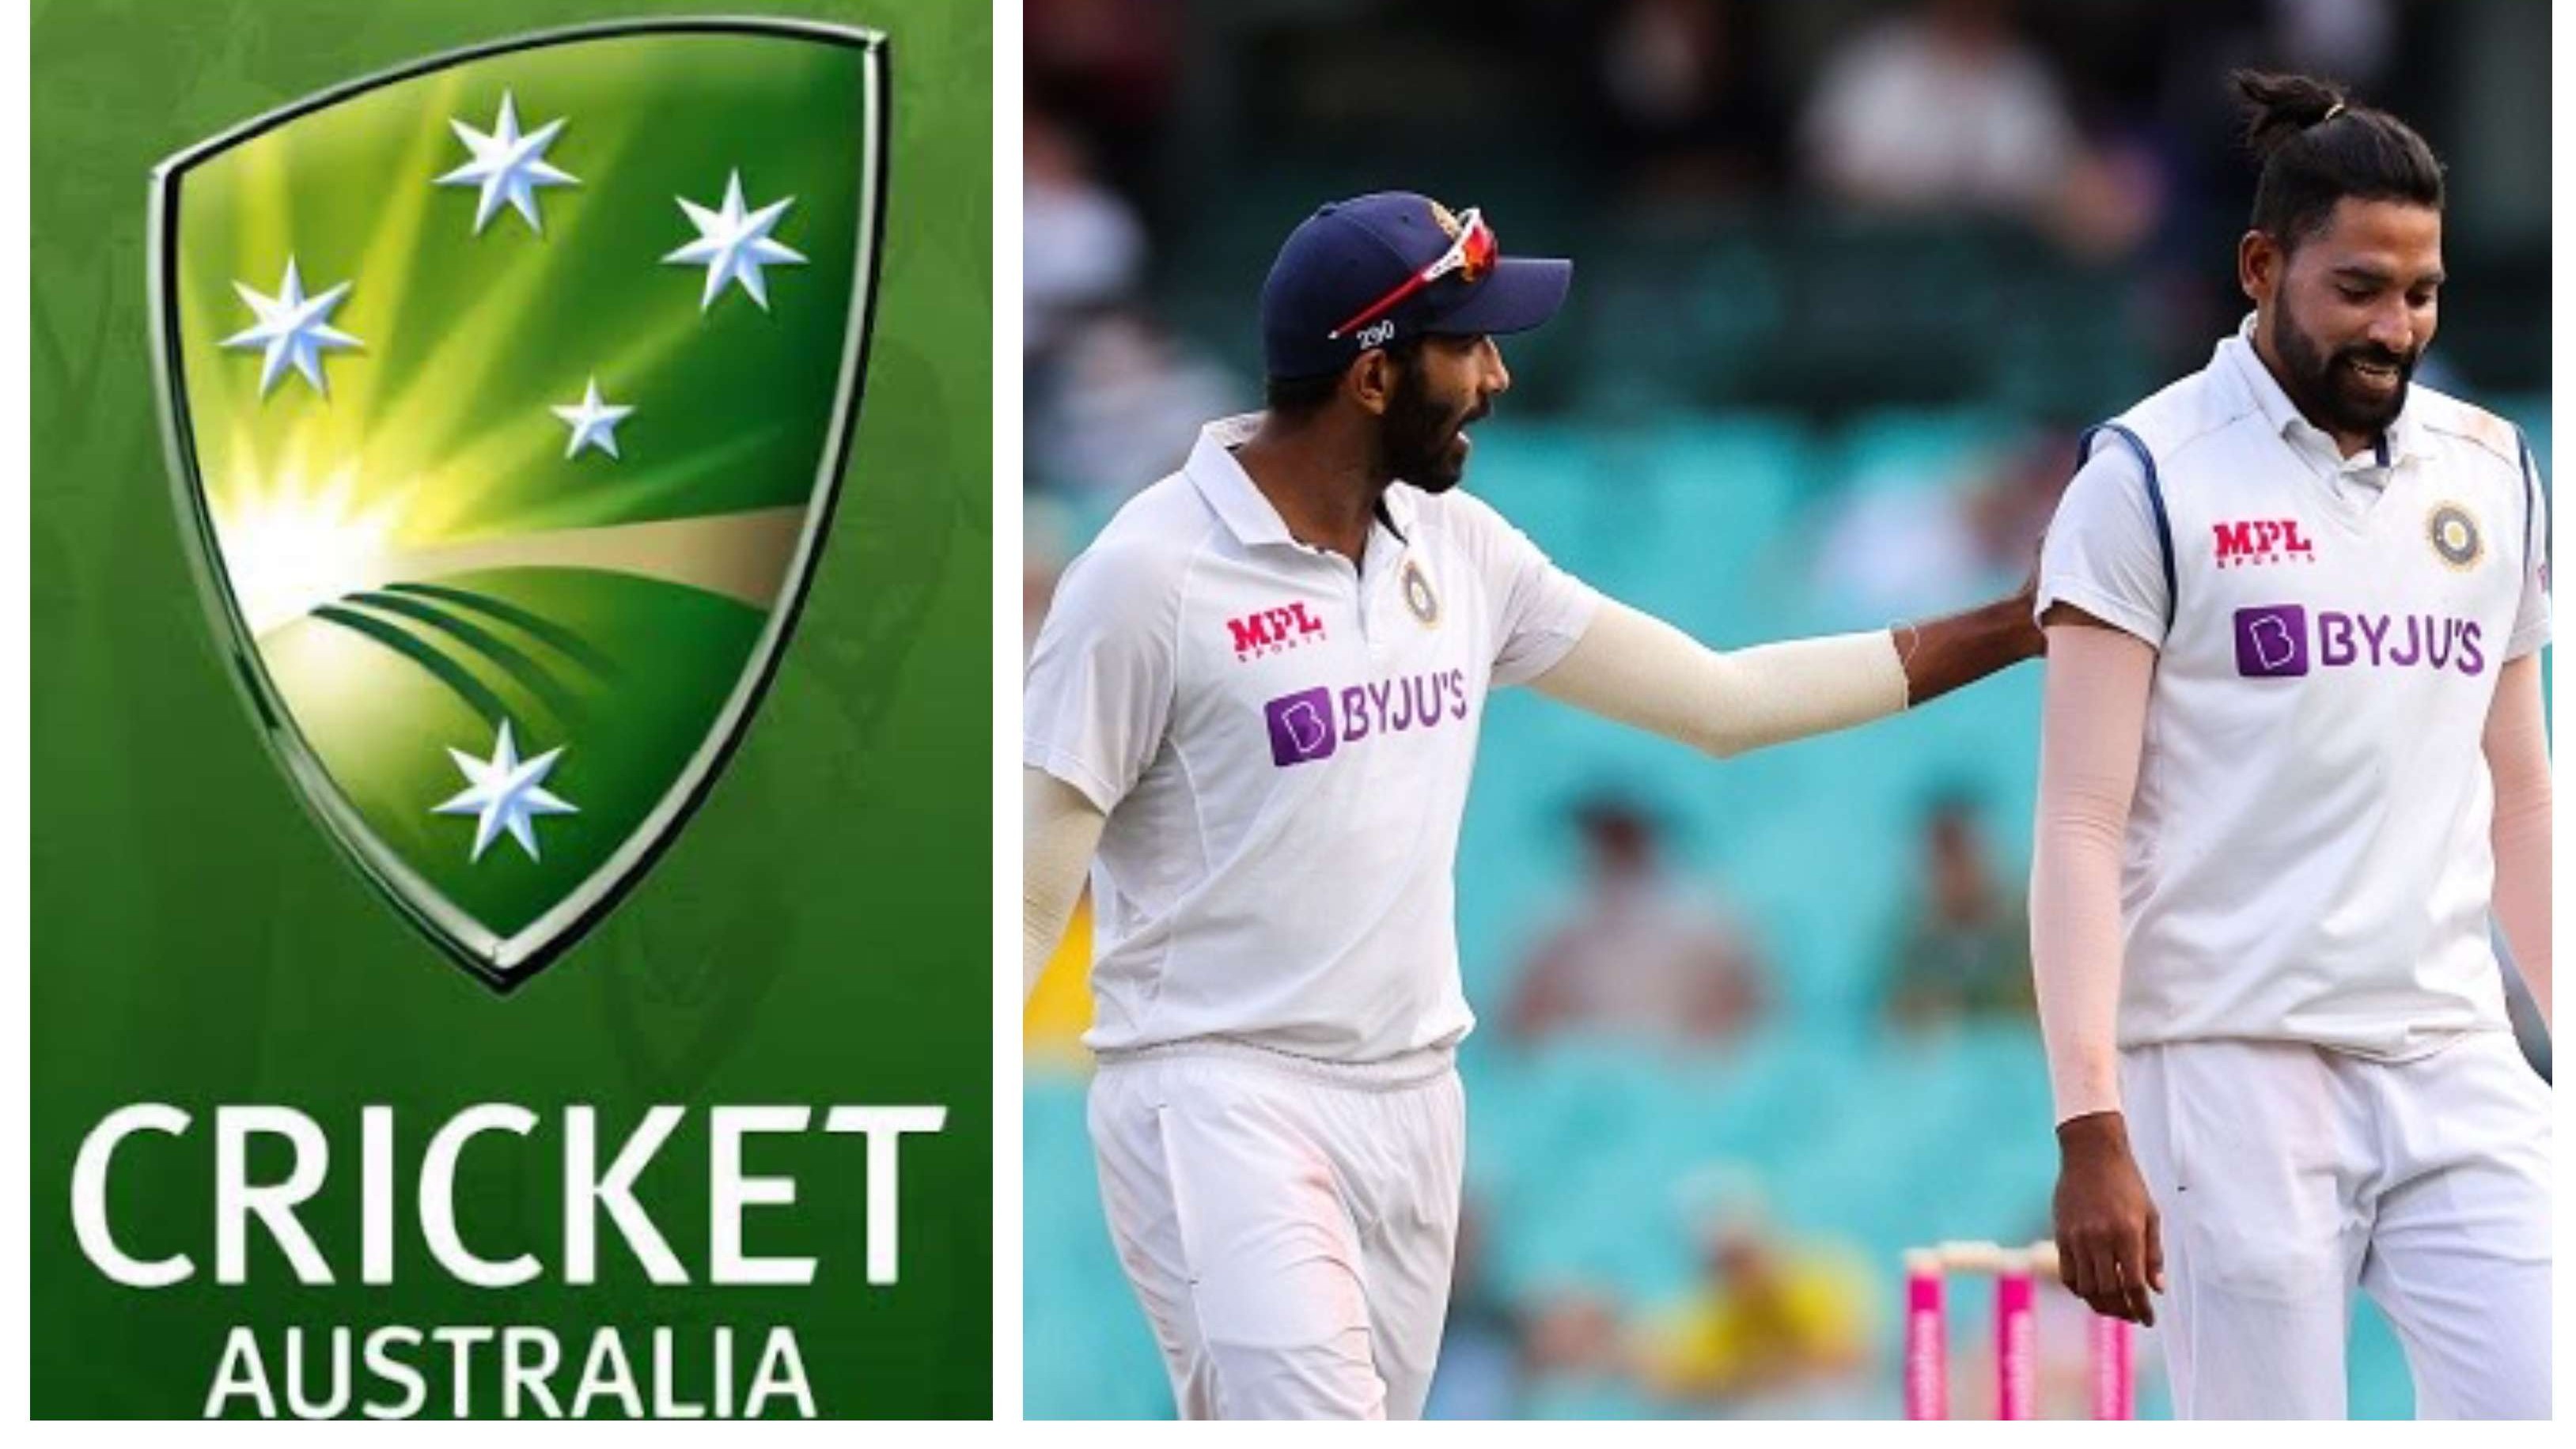 “Indian players were subjected to racial abuse at SCG”, confirms Cricket Australia